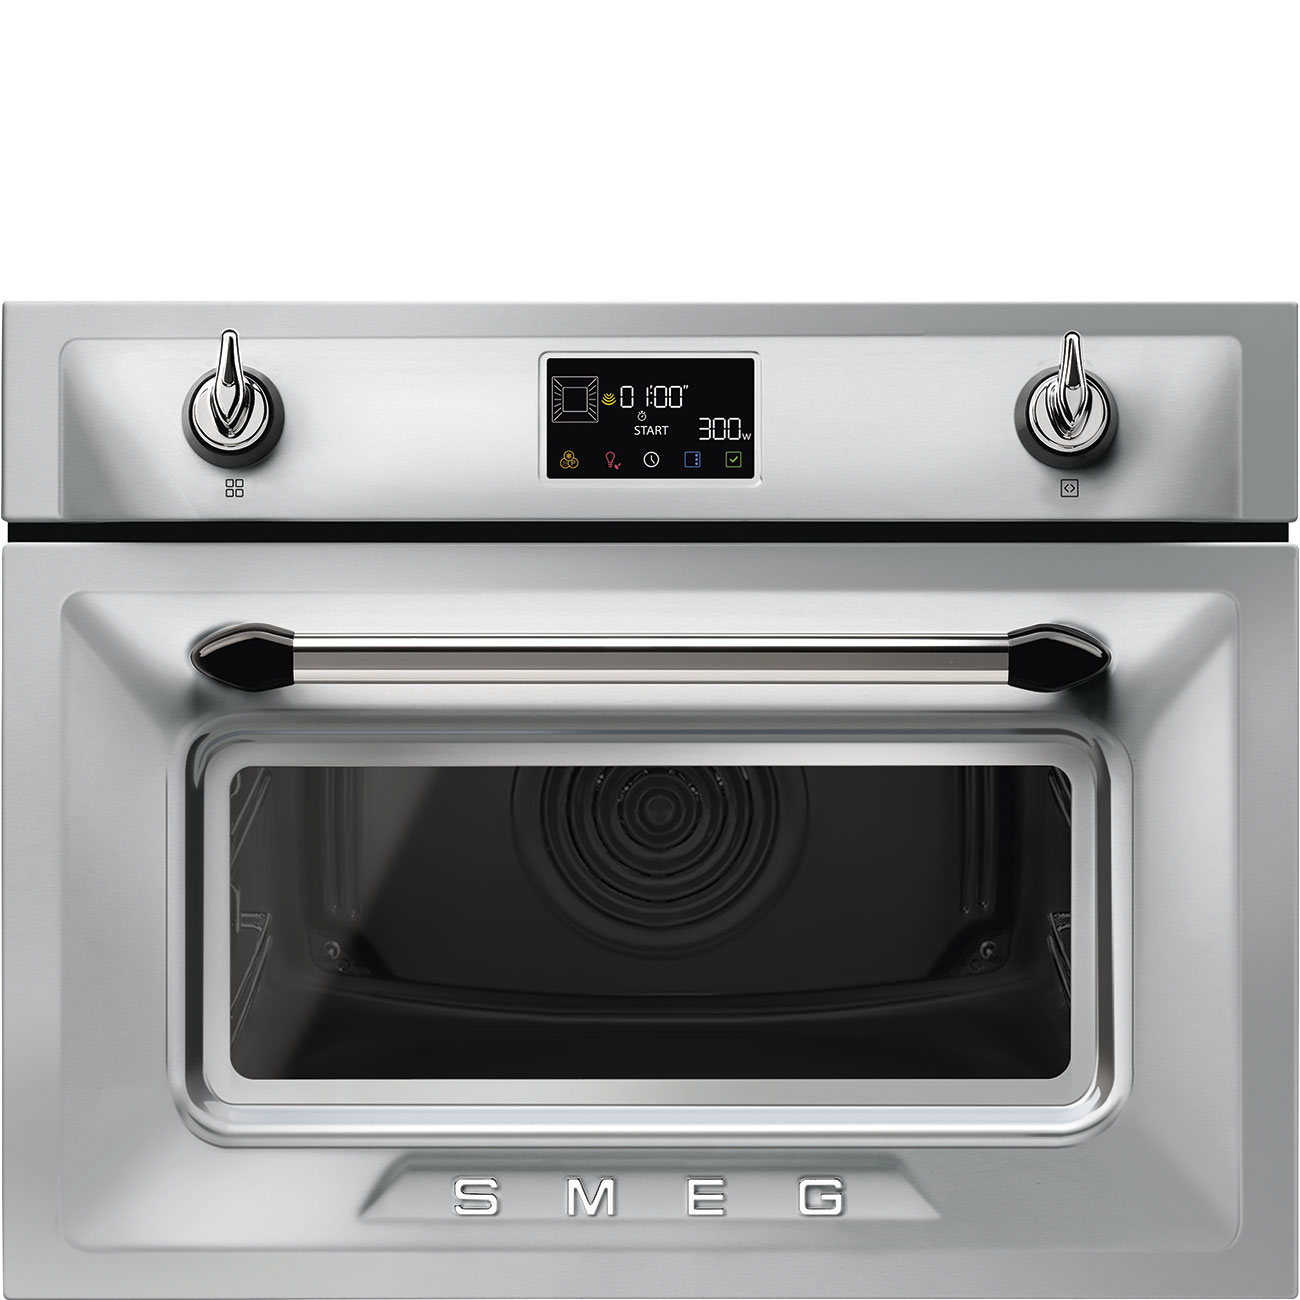 Stainless steel Micro combi Galileo Oven.  45cm compact. Built-in. Smeg_1